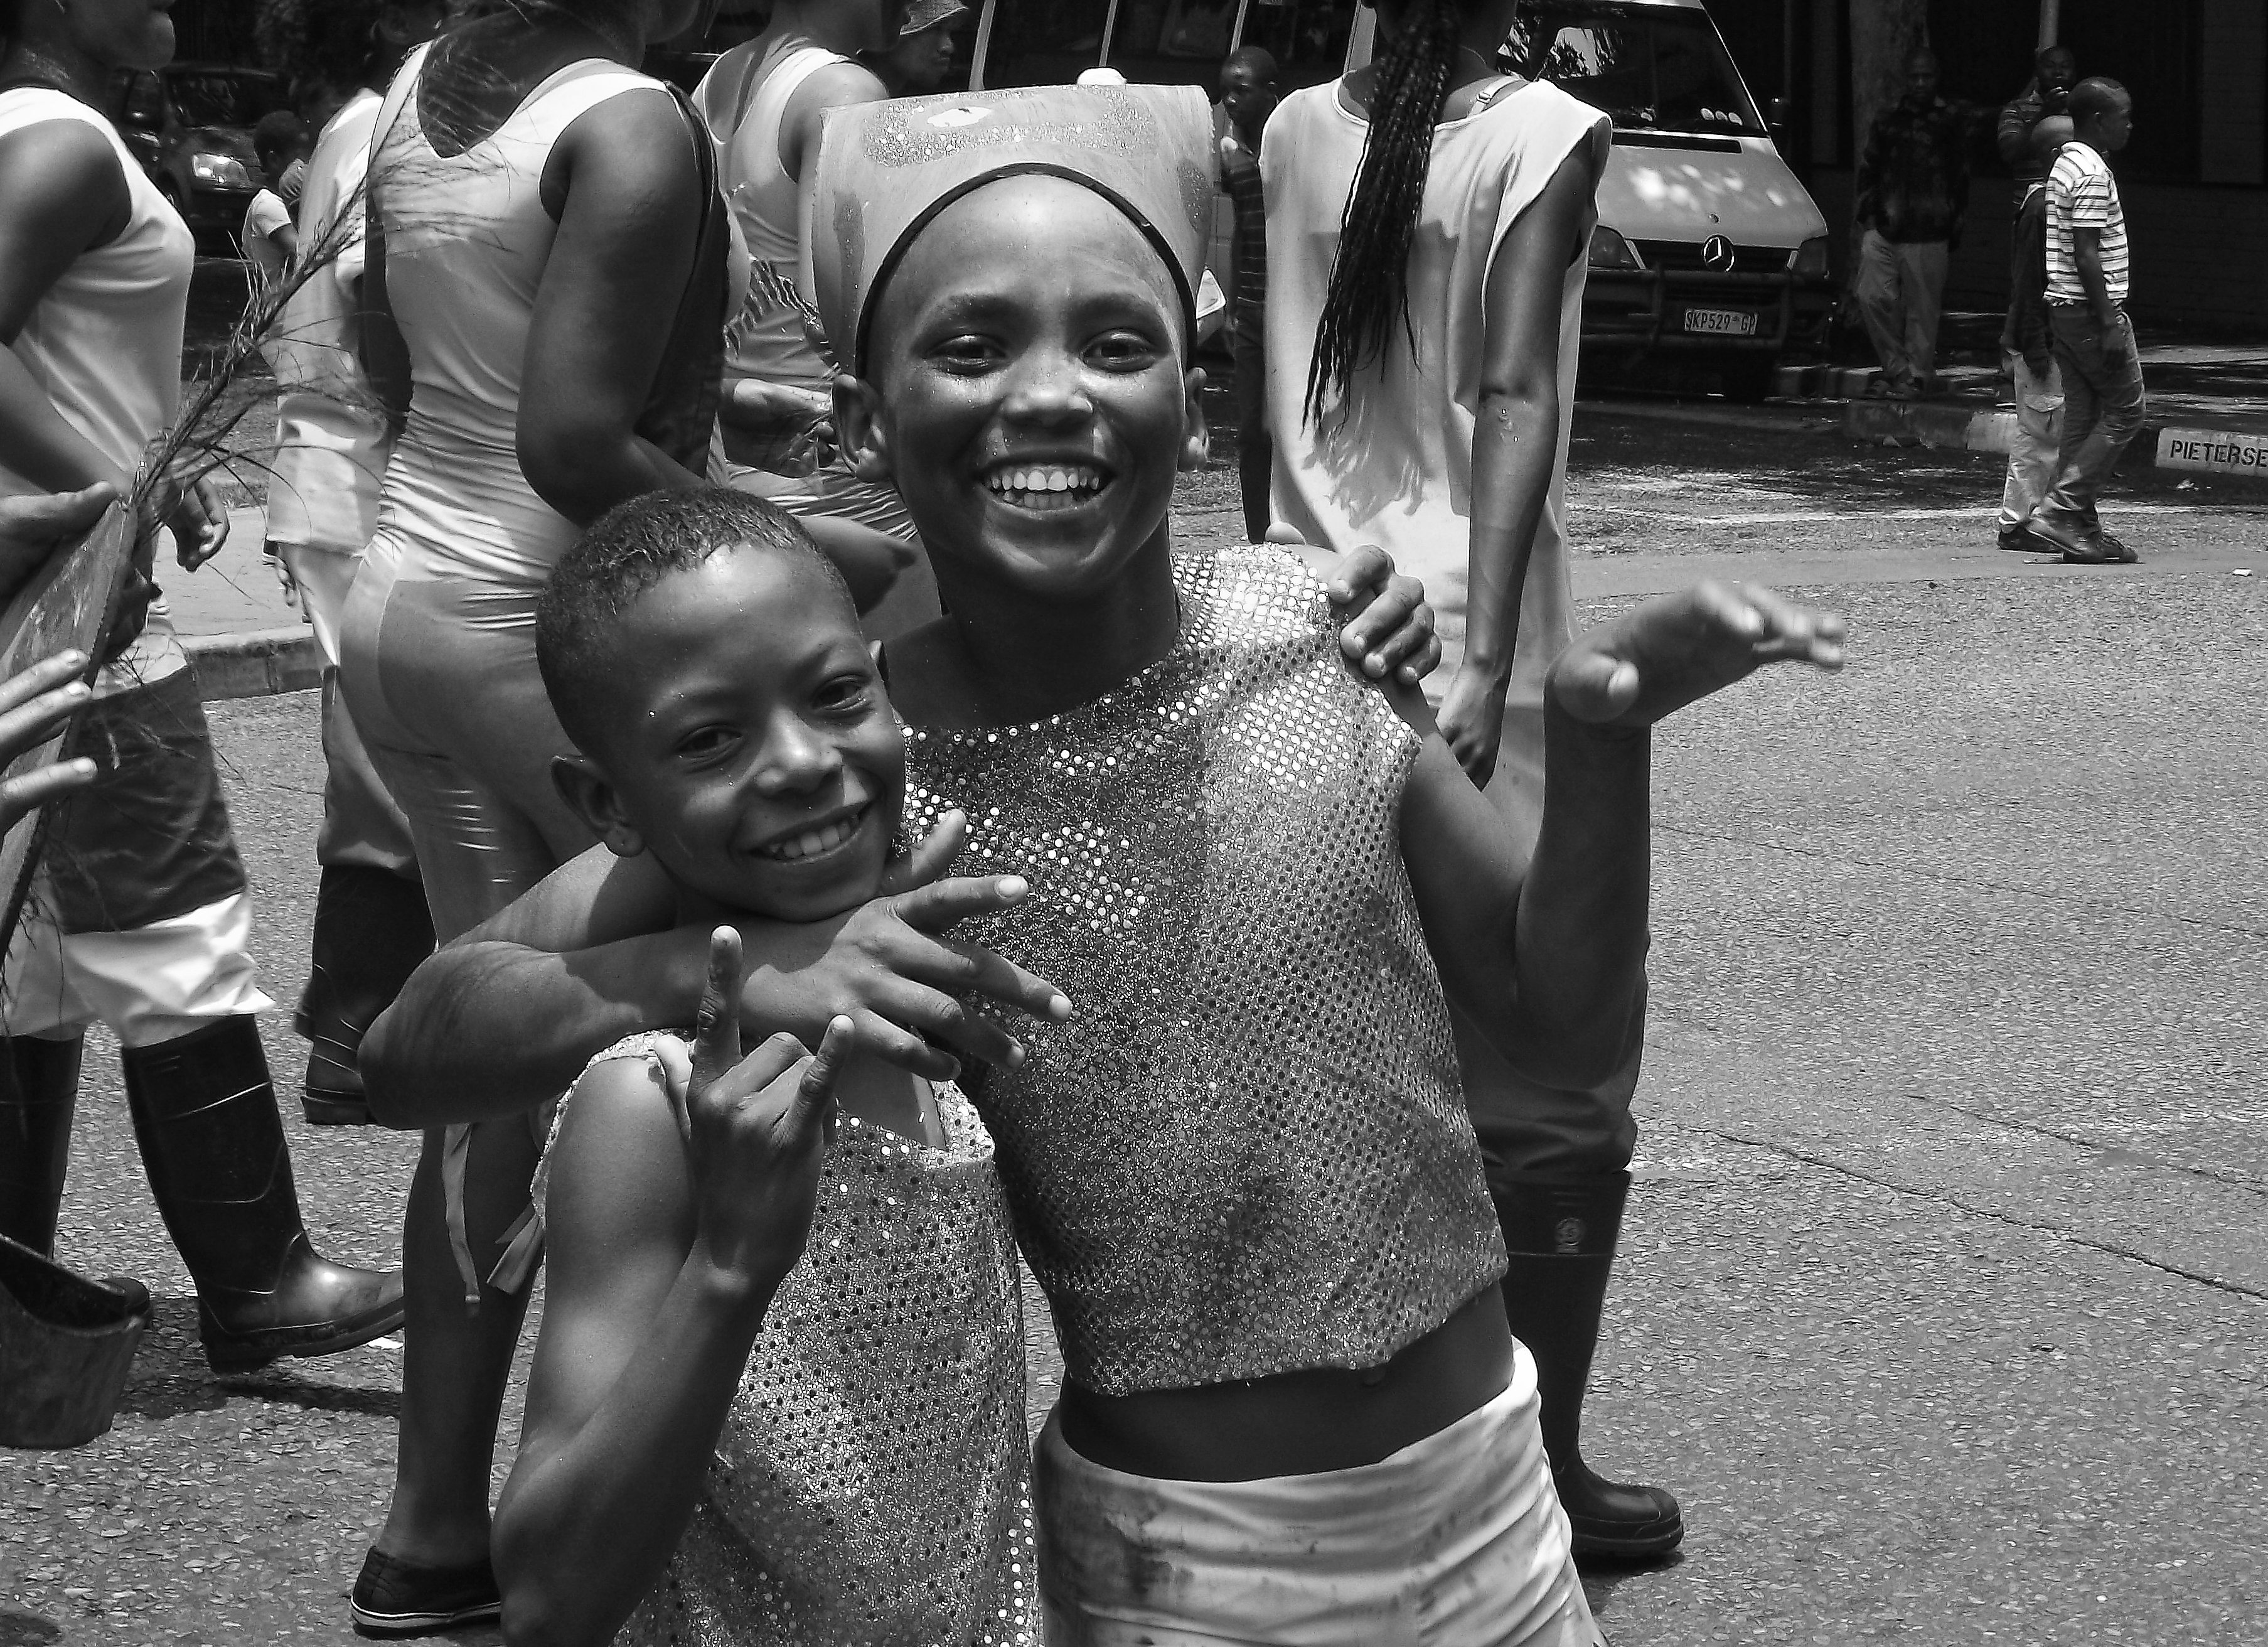 Performance arts and street carnivals occur as frequently as marches do (Hillbrow, 2010)